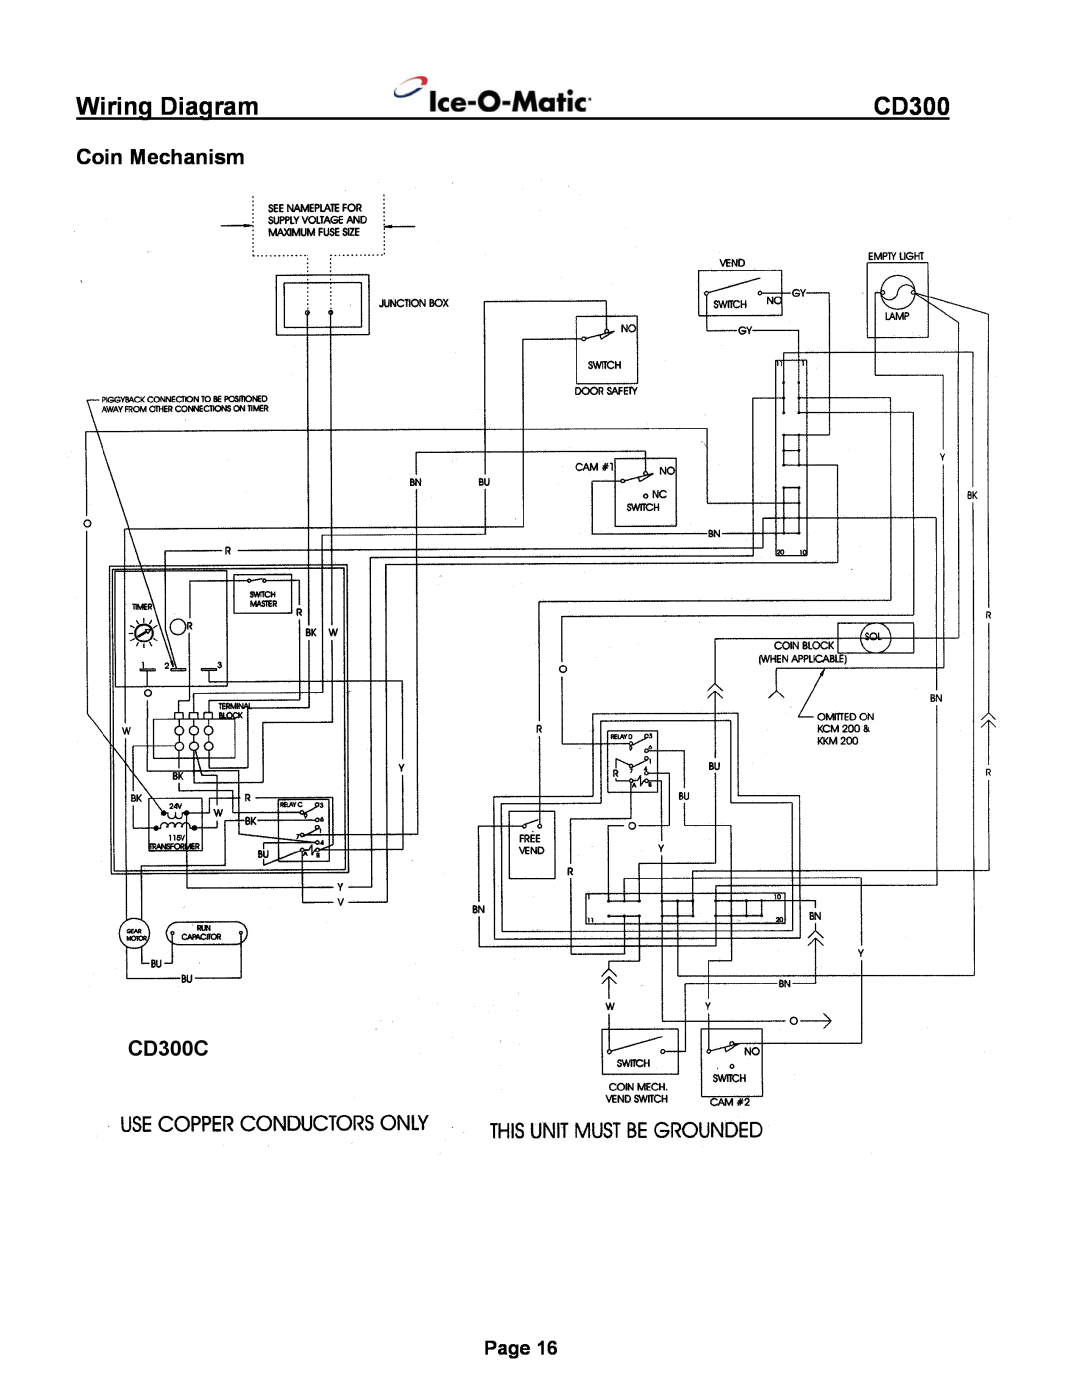 Ice-O-Matic installation manual Coin Mechanism CD300C, Wiring Diagram 